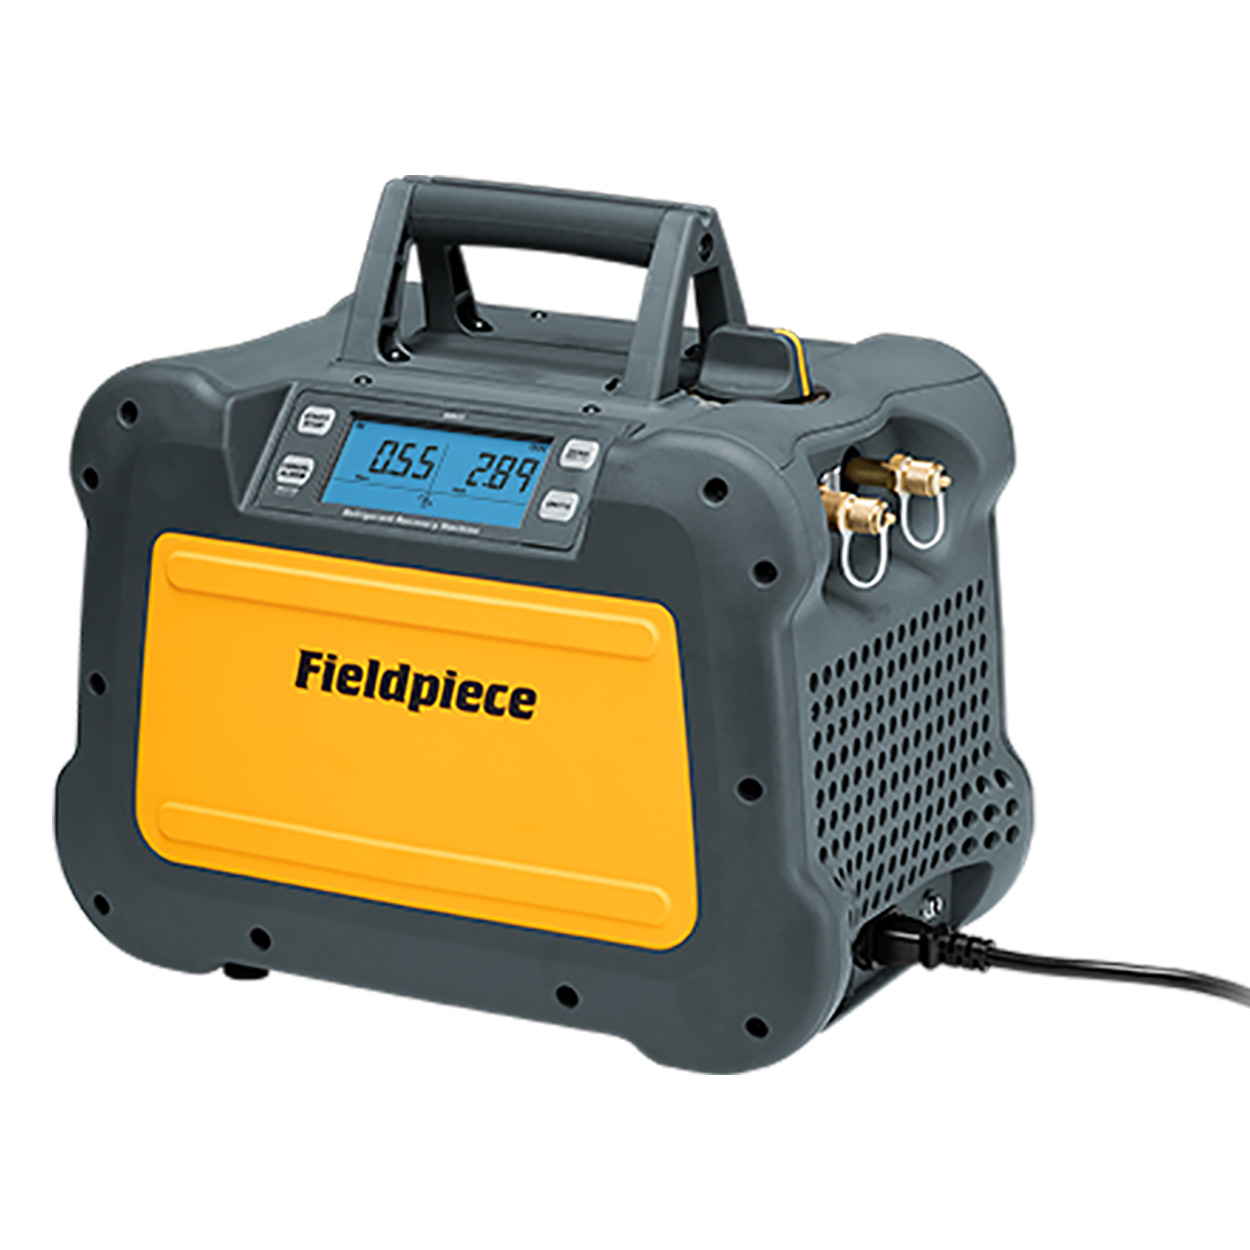 Fieldpiece USA - MR45INT Digital Recovery Machine 1 HP - 0,75 Kw - 430 kg/hour in push/pull mode (R410A)